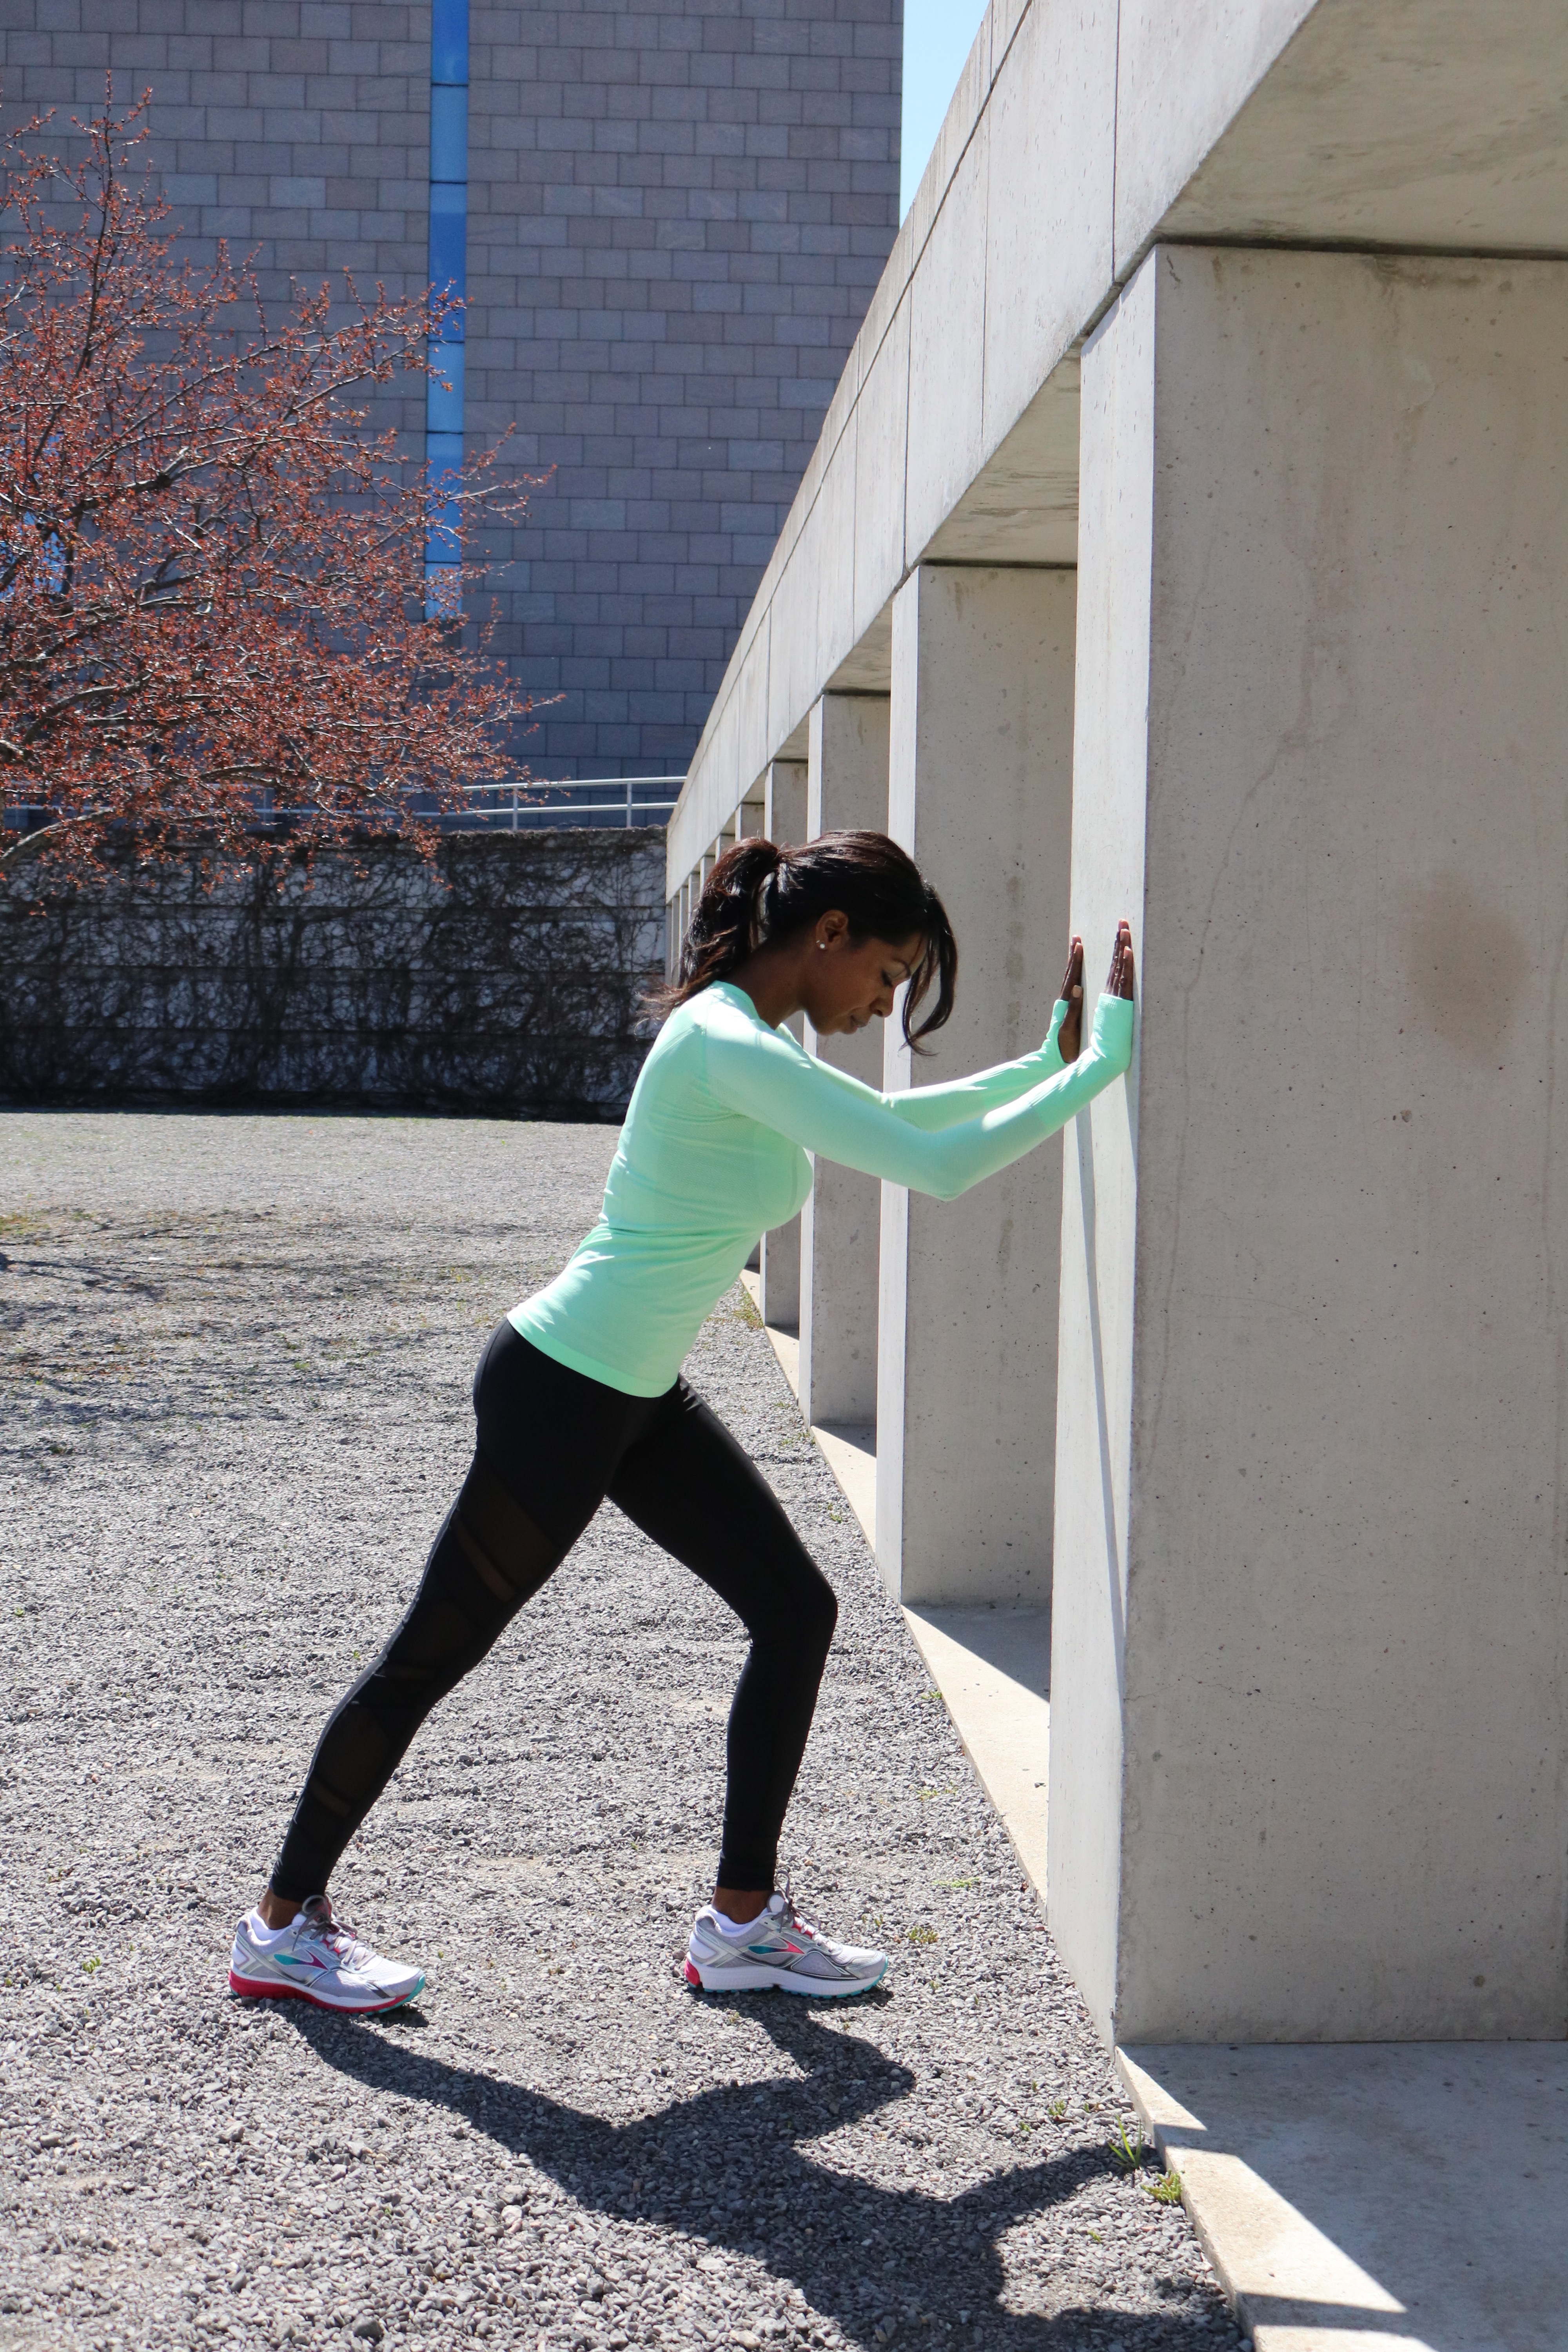 Getting Into Shape With Sports 4, Your Sports Apparel Experts | www.styledomination.com